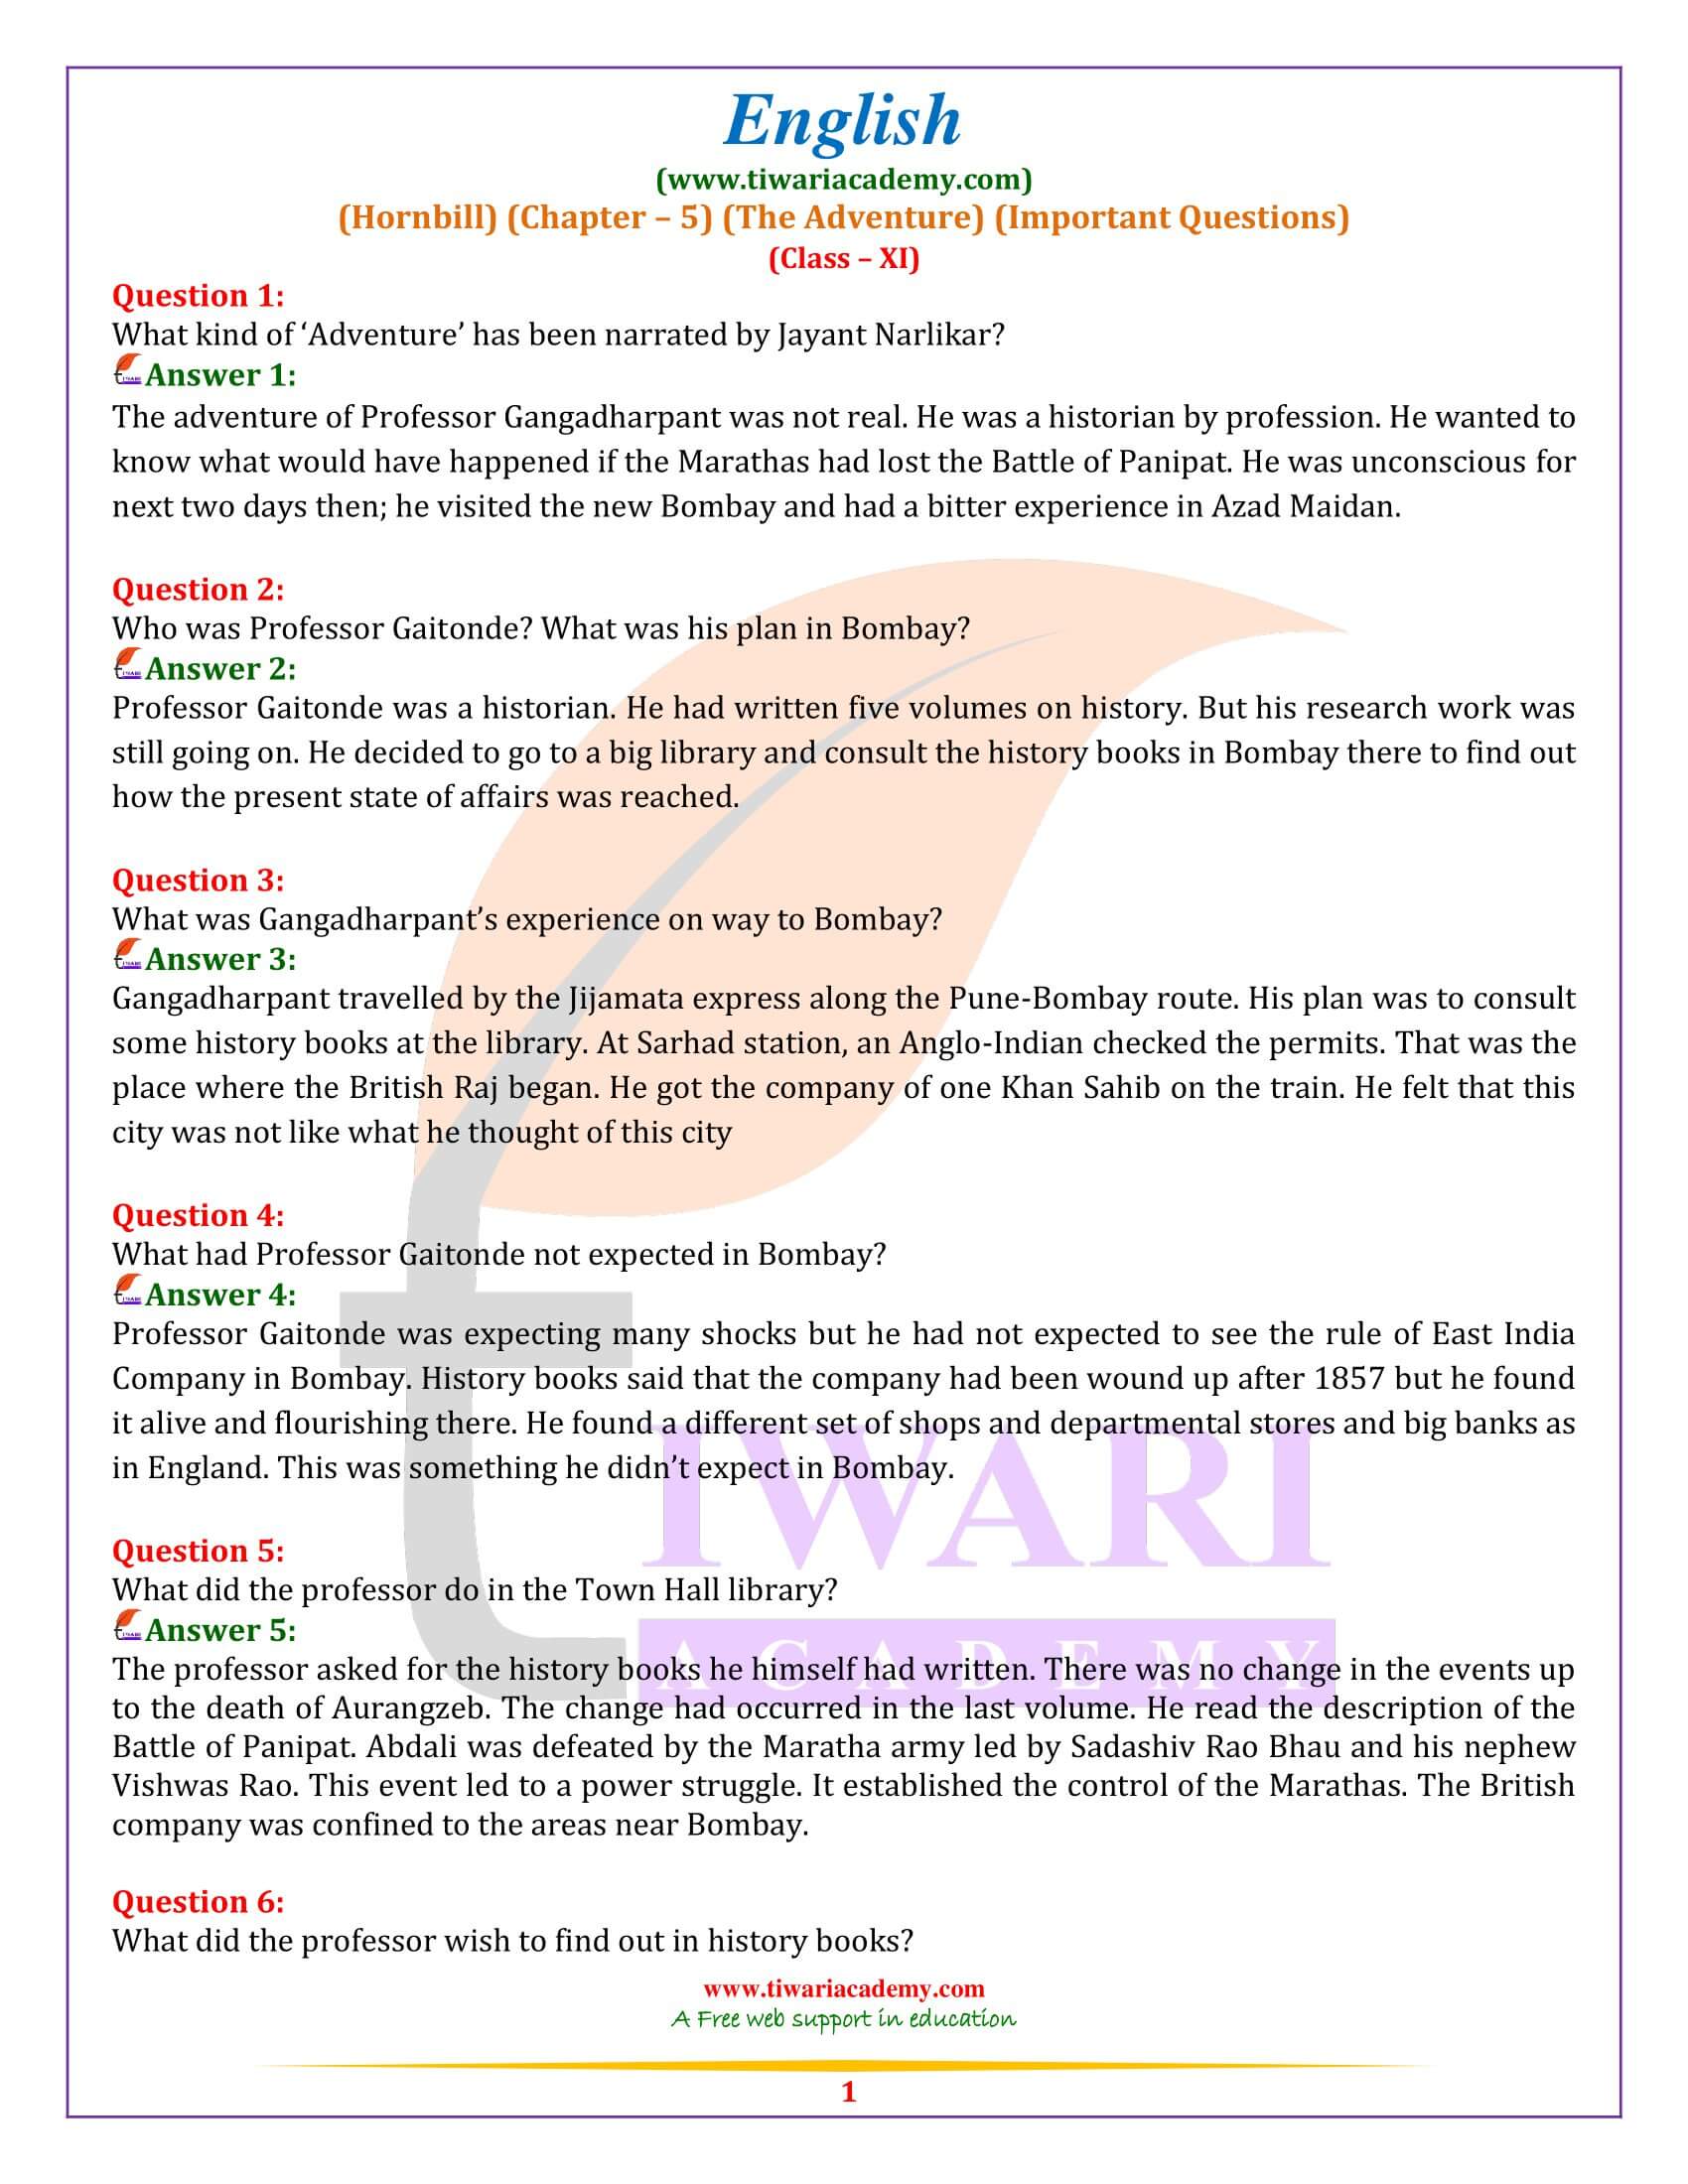 Class 11 English Hornbill Chapter 5 Important Questions